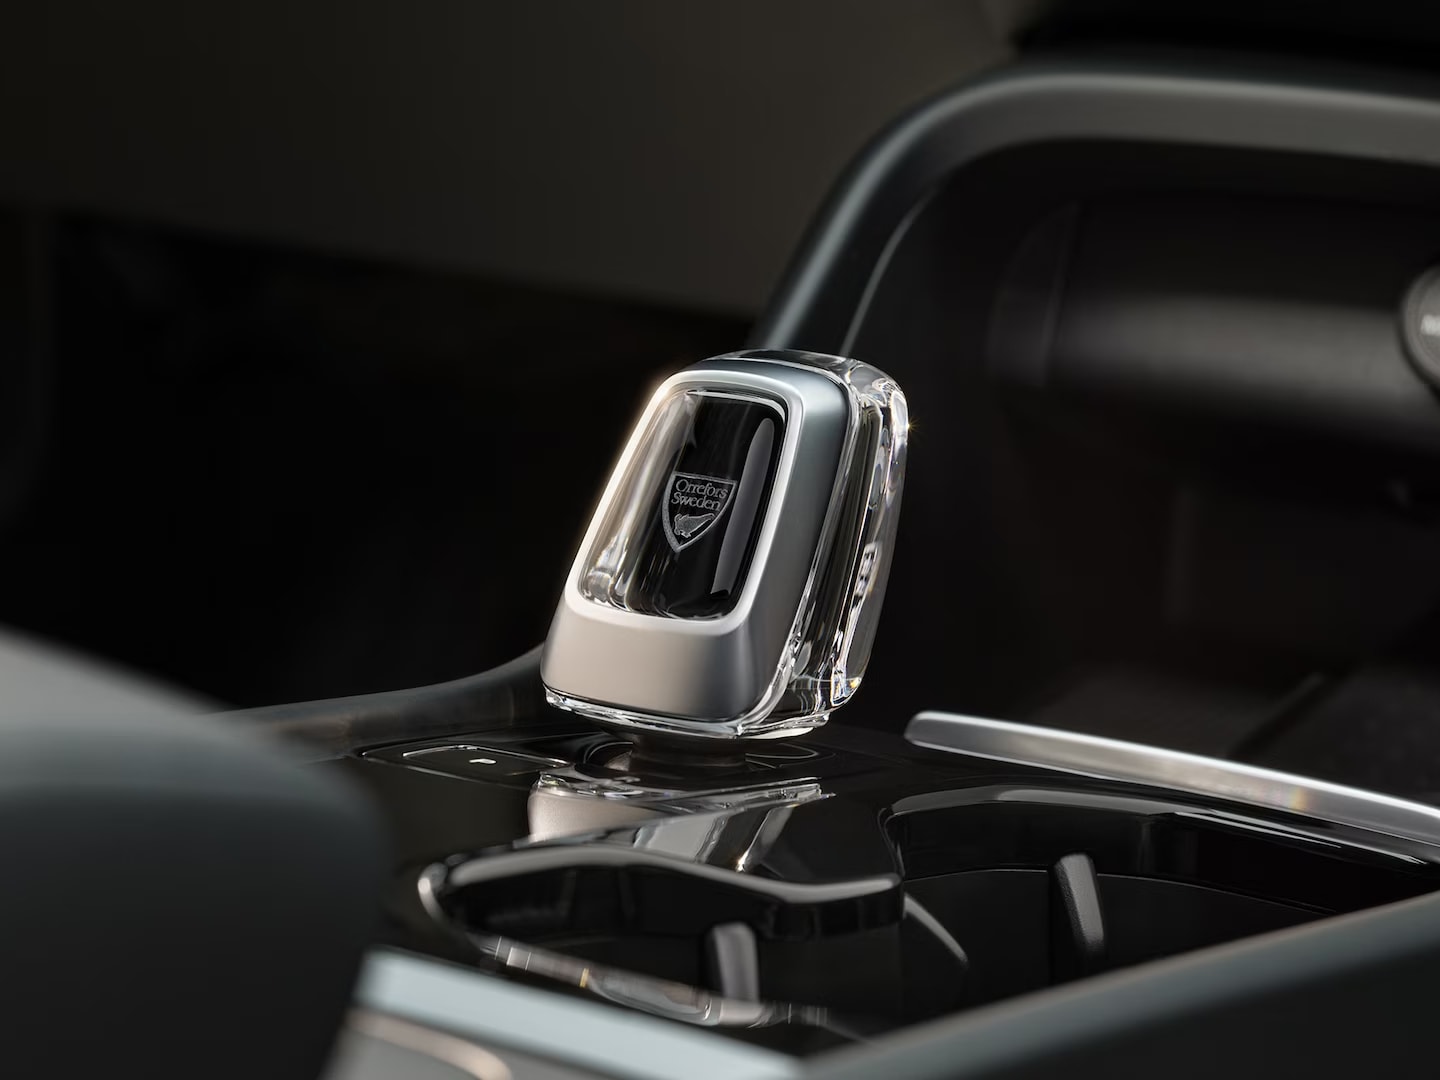 The Orrefors crystal gear shift in the fully electric Volvo EC40.